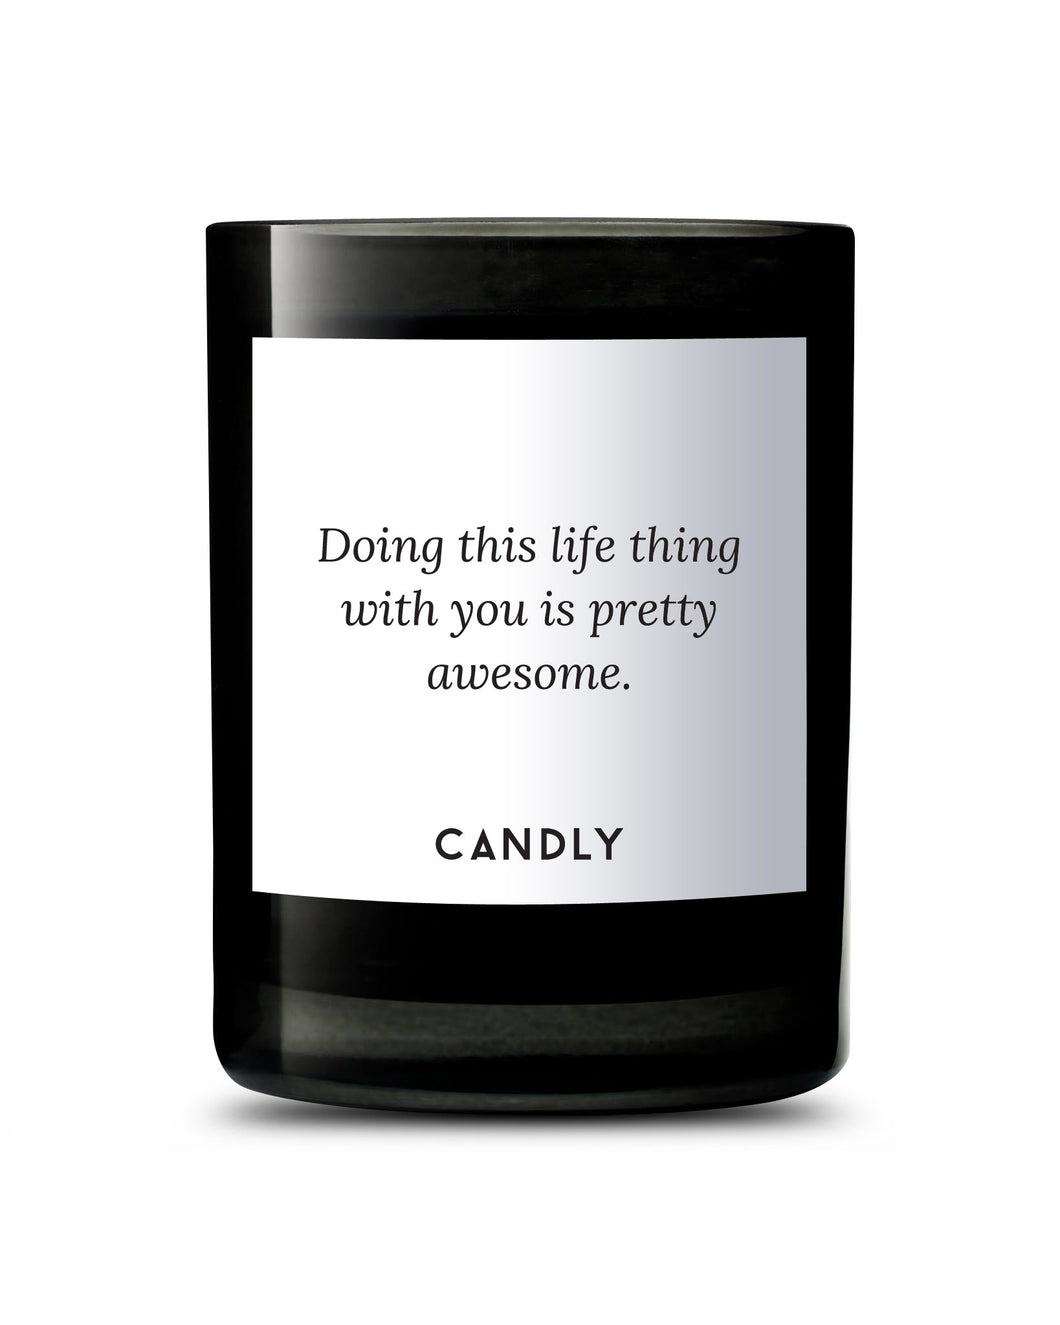 The Life Candle